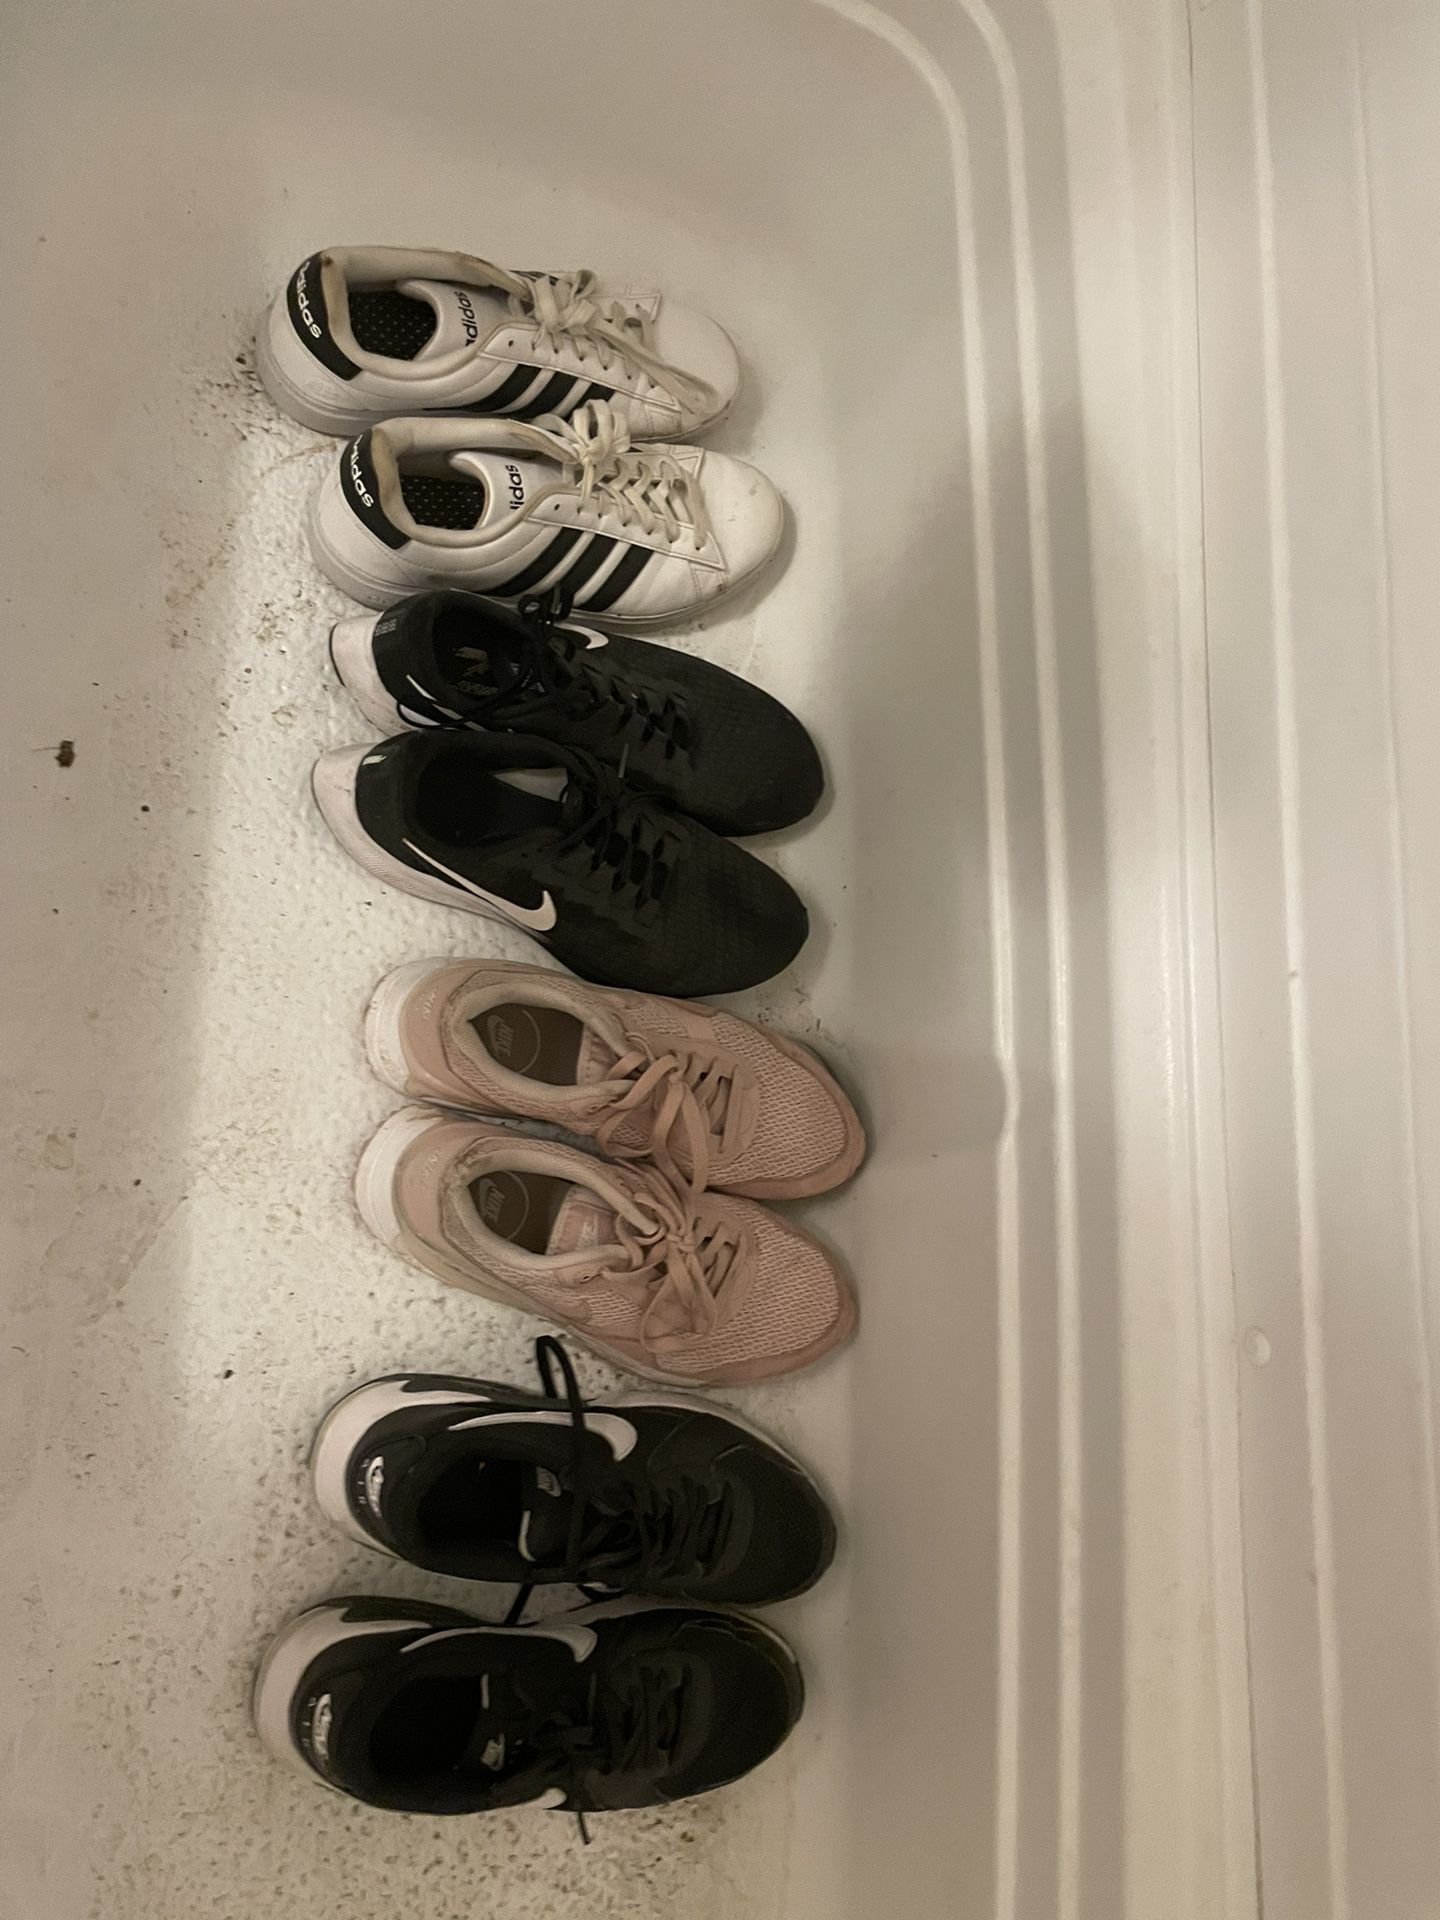 4 Pairs Of Tennis Shoes